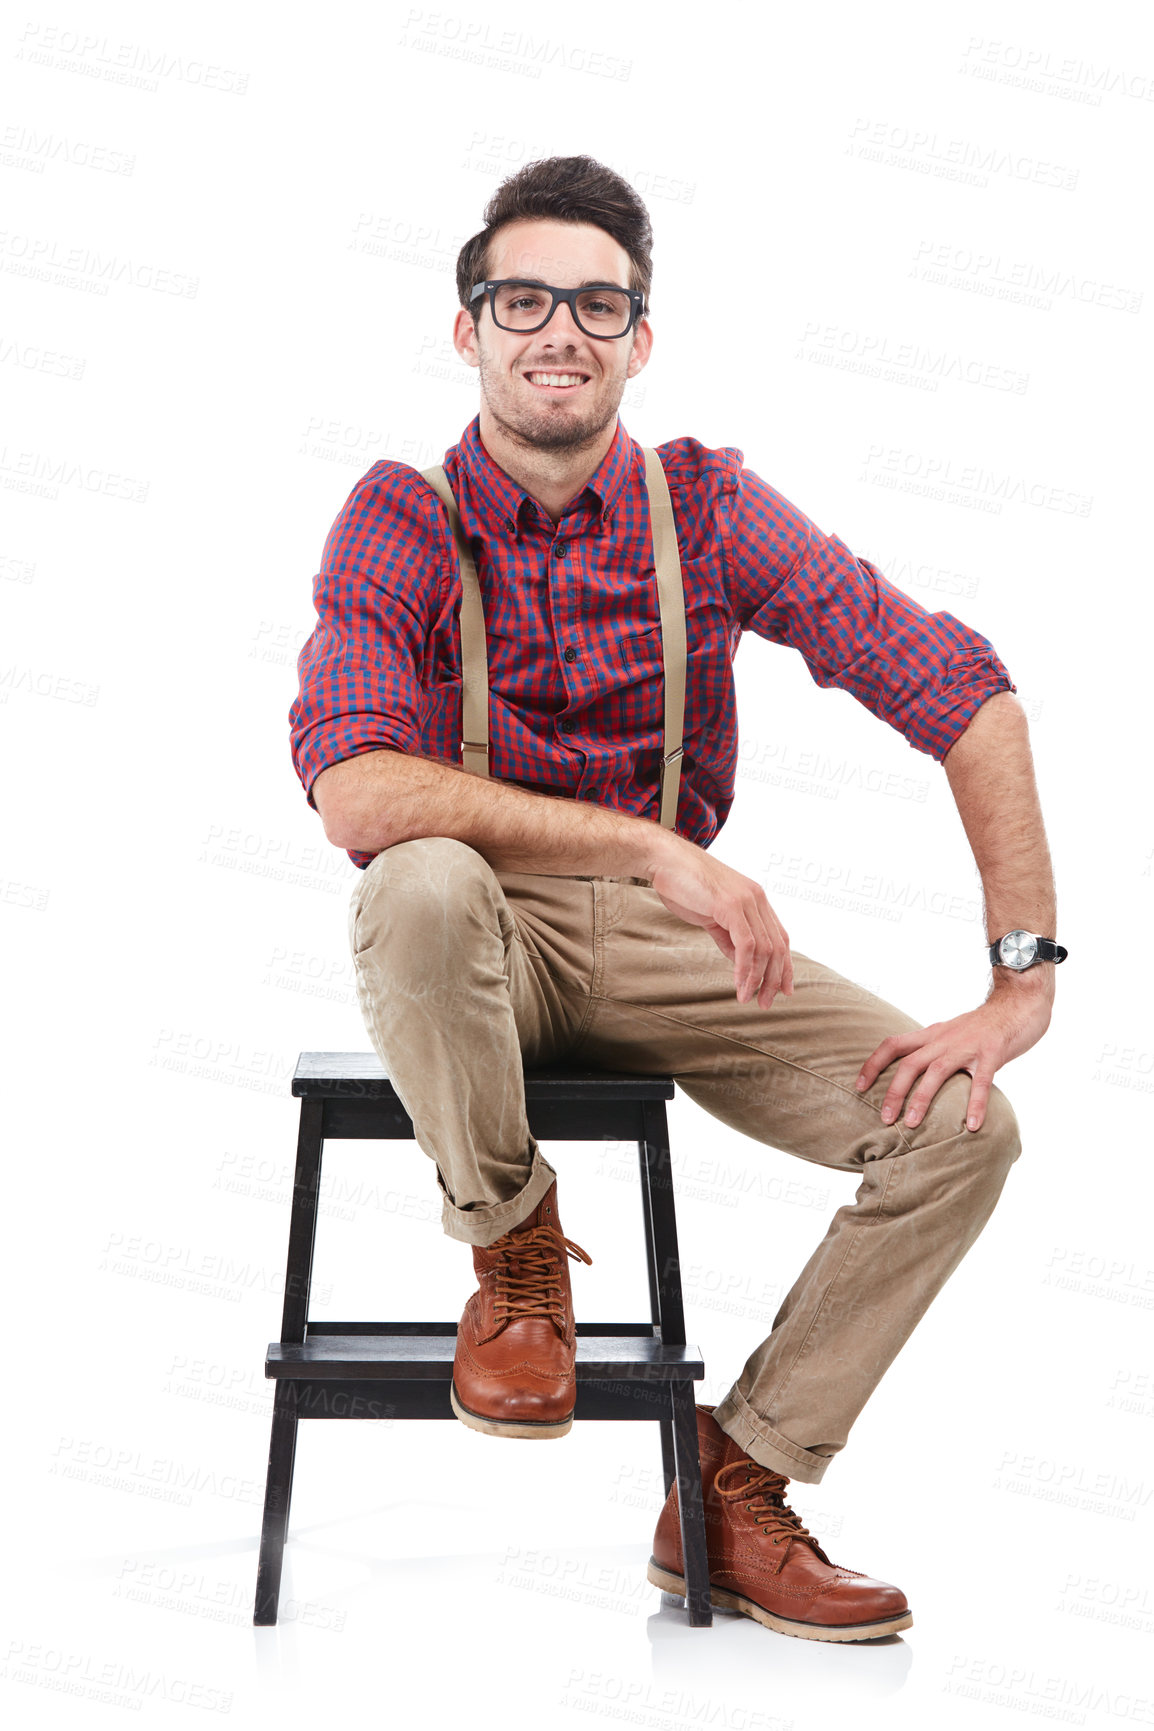 Buy stock photo Nerd, smile and portrait of a man sitting on a chair wearing geek clothing and glasses. White background, happiness and smiling model on a stool in a studio looking positive, smart and hipster